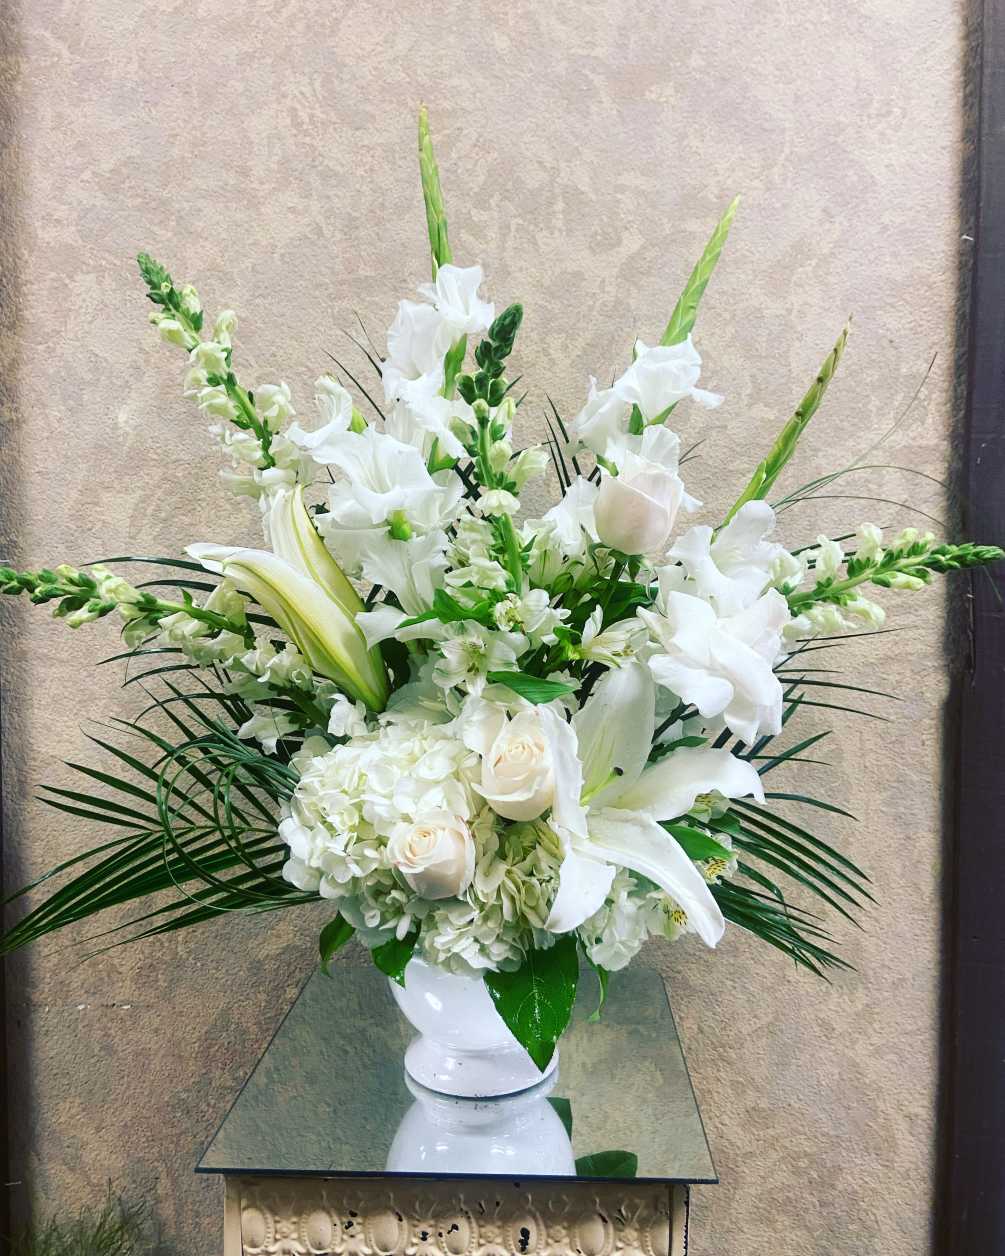 Type of Flowers: All-white Gladiolas, Snapdragon, Lilies, Roses, and Hydrangae in a